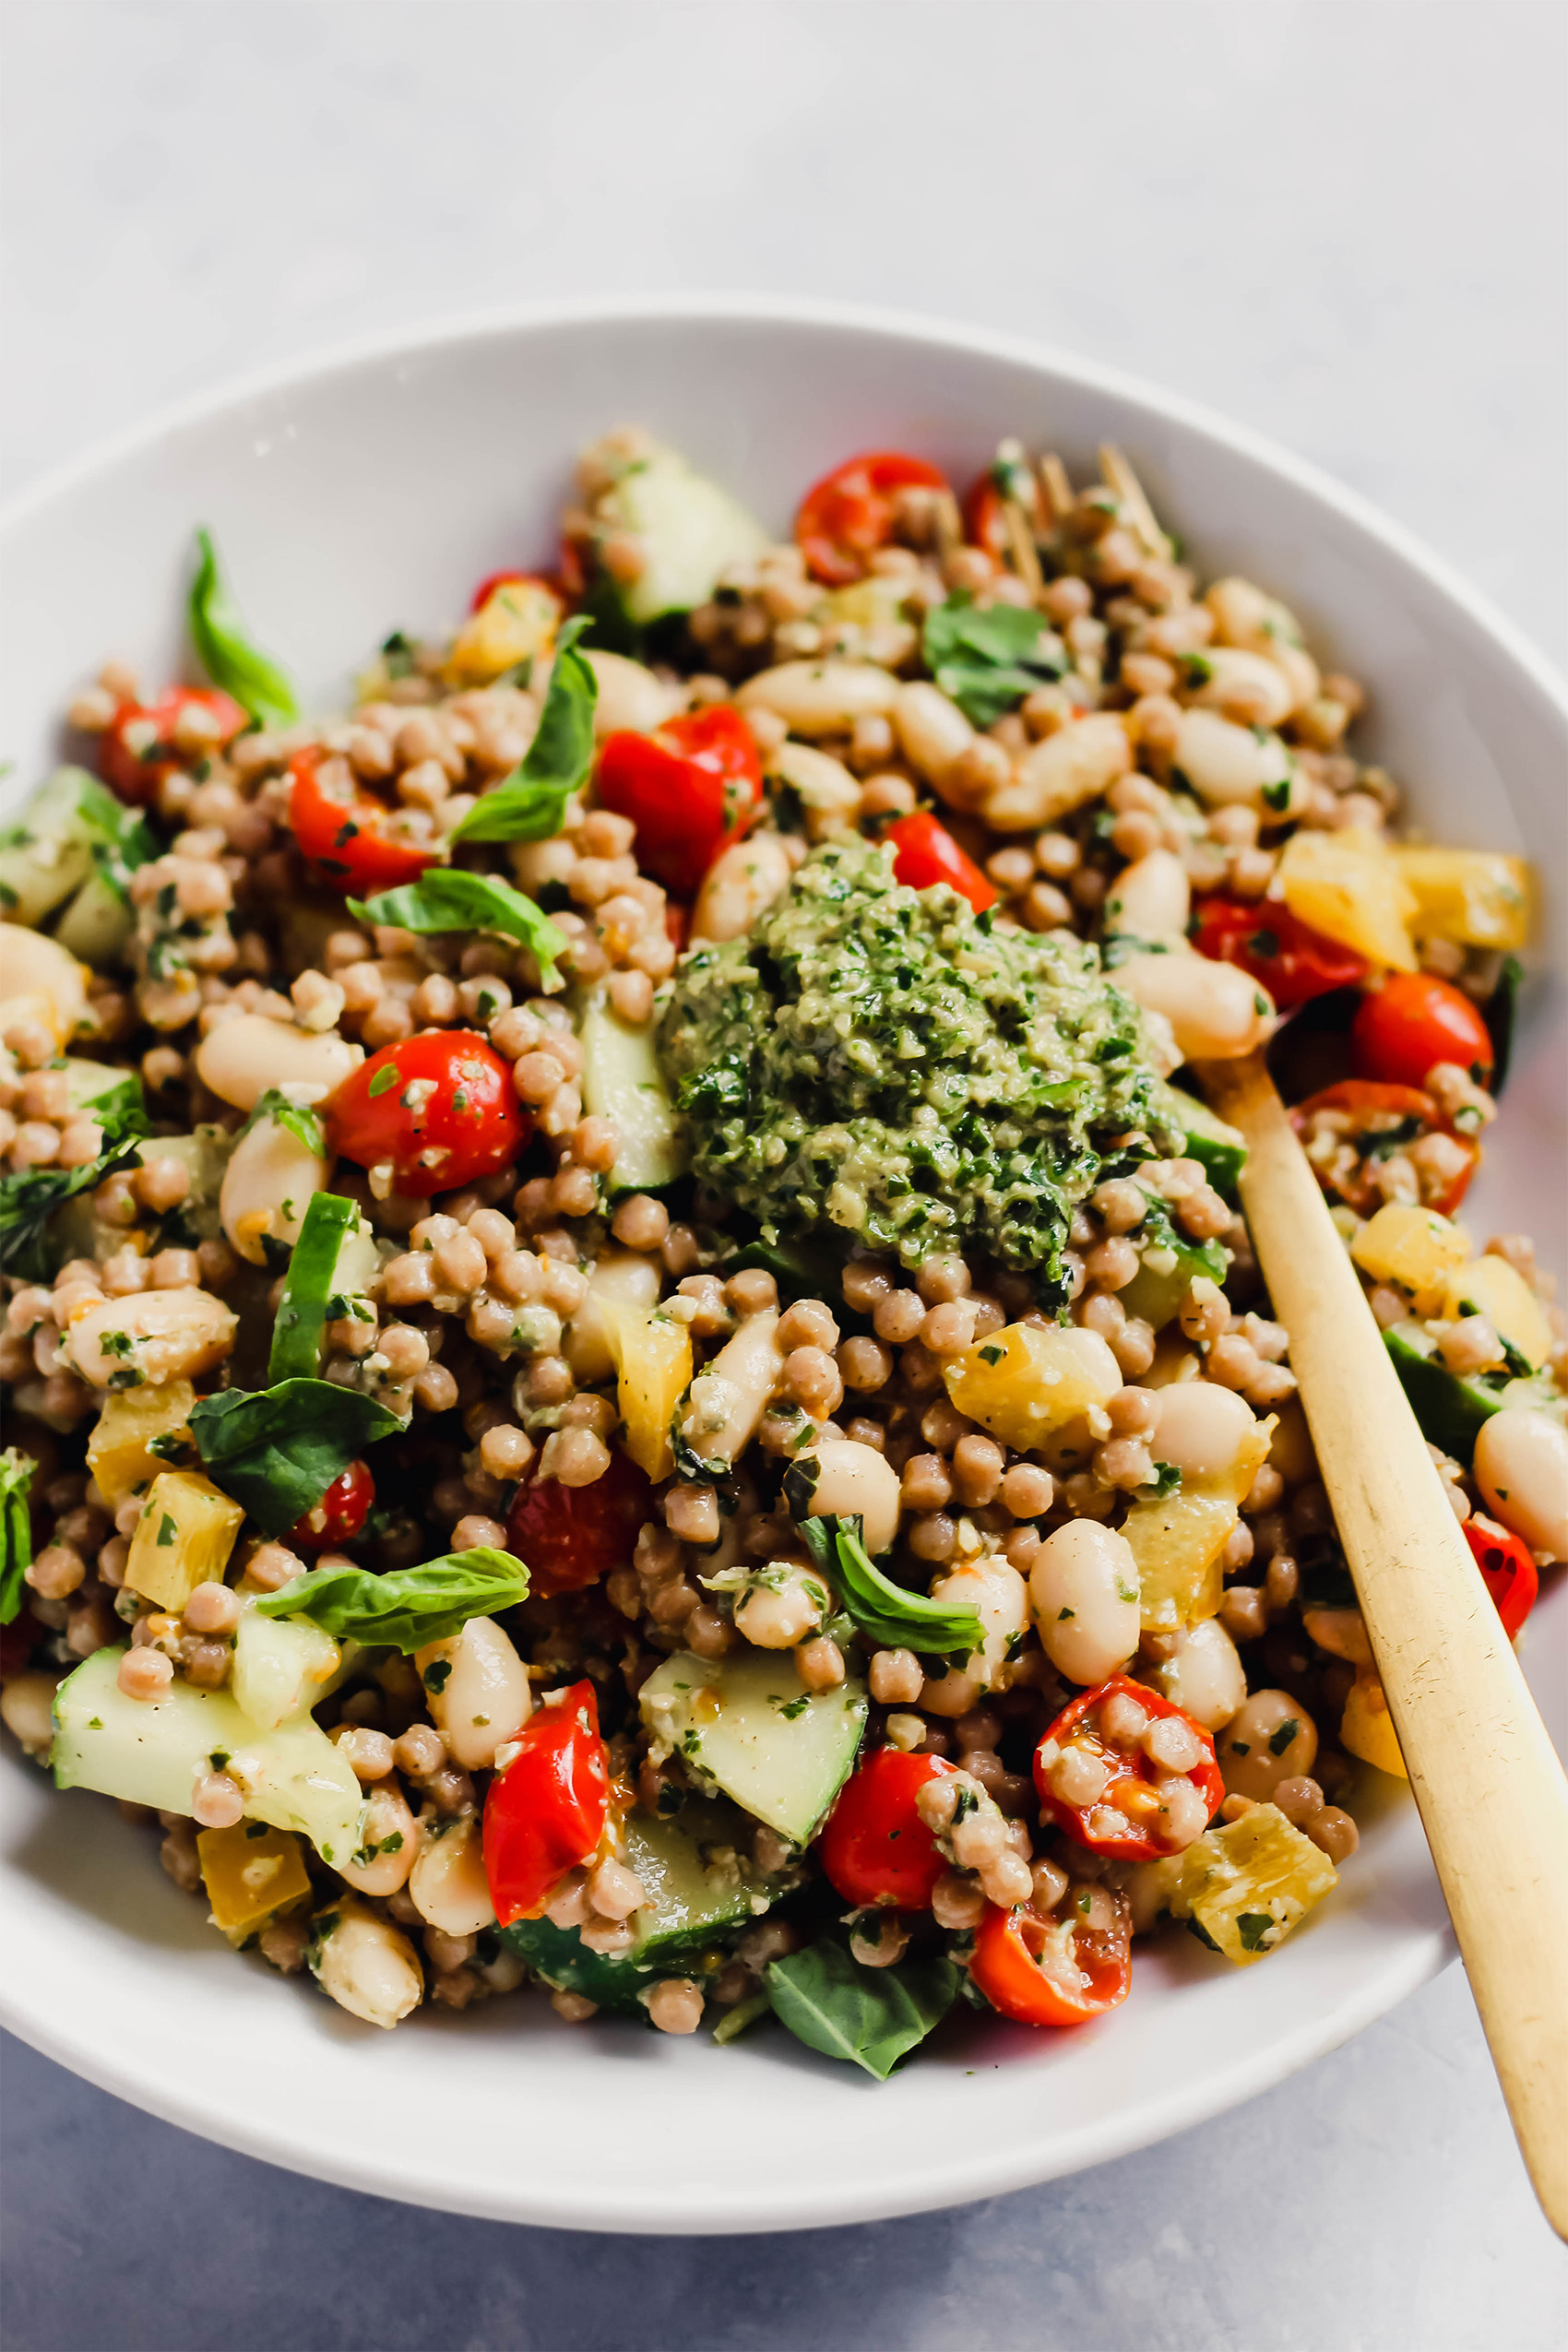 a couscous salad with tomatoes, cucumbers and a pesto dressing